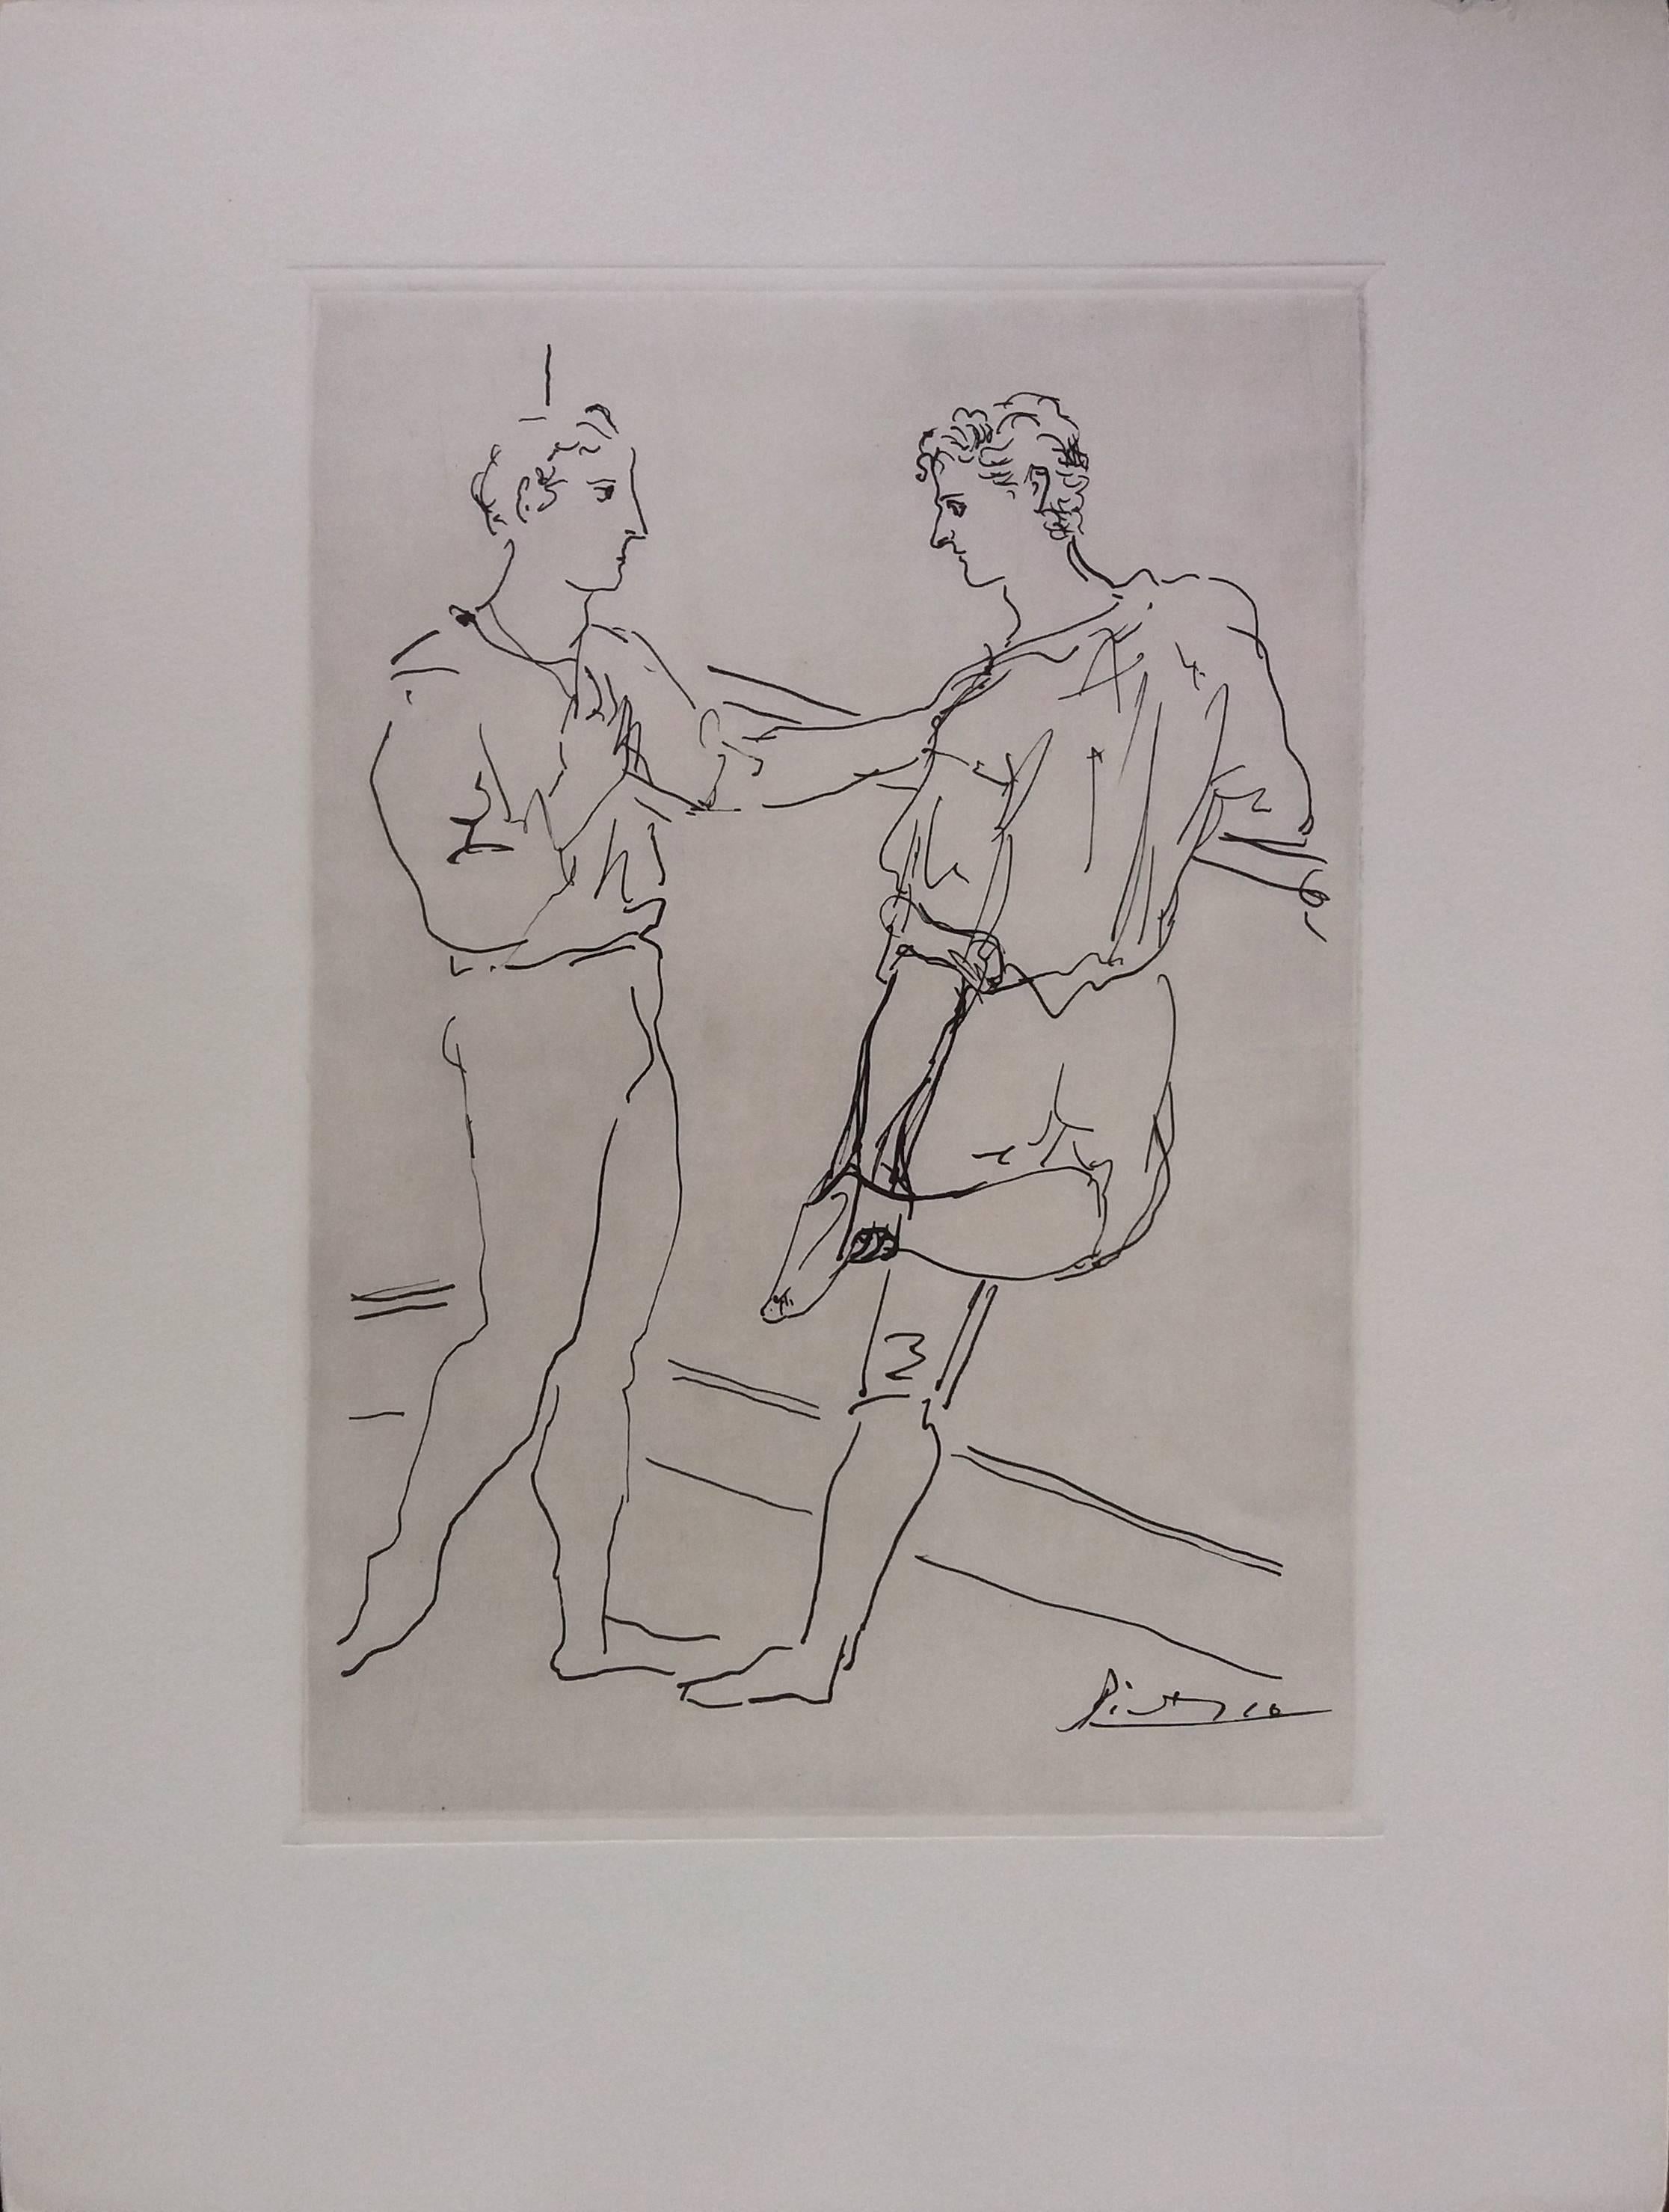 (after) Pablo Picasso Figurative Print - Pablo Picasso Original drawing engraved on copper 1/8 (1943)